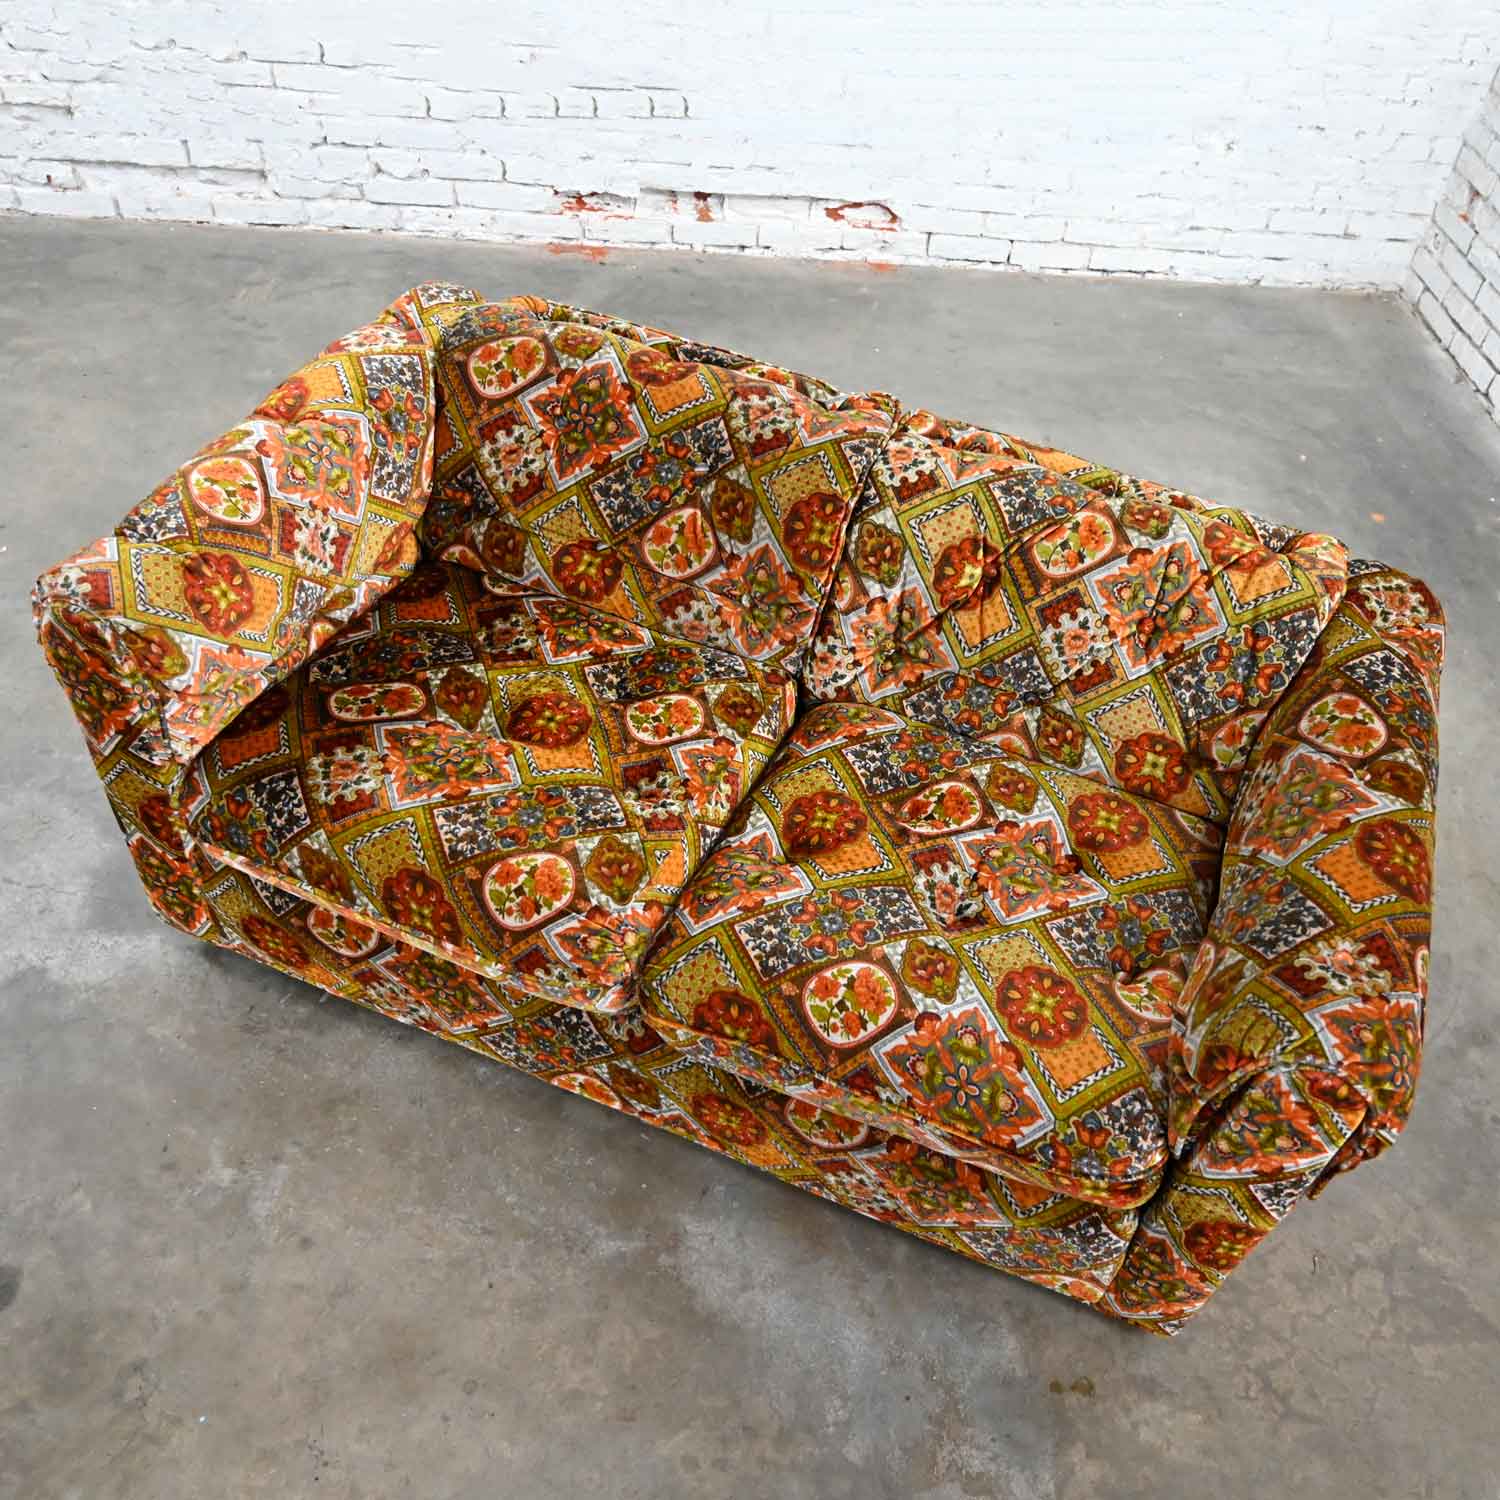 Vintage Modern Orange & Gold Geometrical Patterned Floral Patchwork Modern Tuxedo Style Love Seat by Maddox Furniture for J.C. Penney.